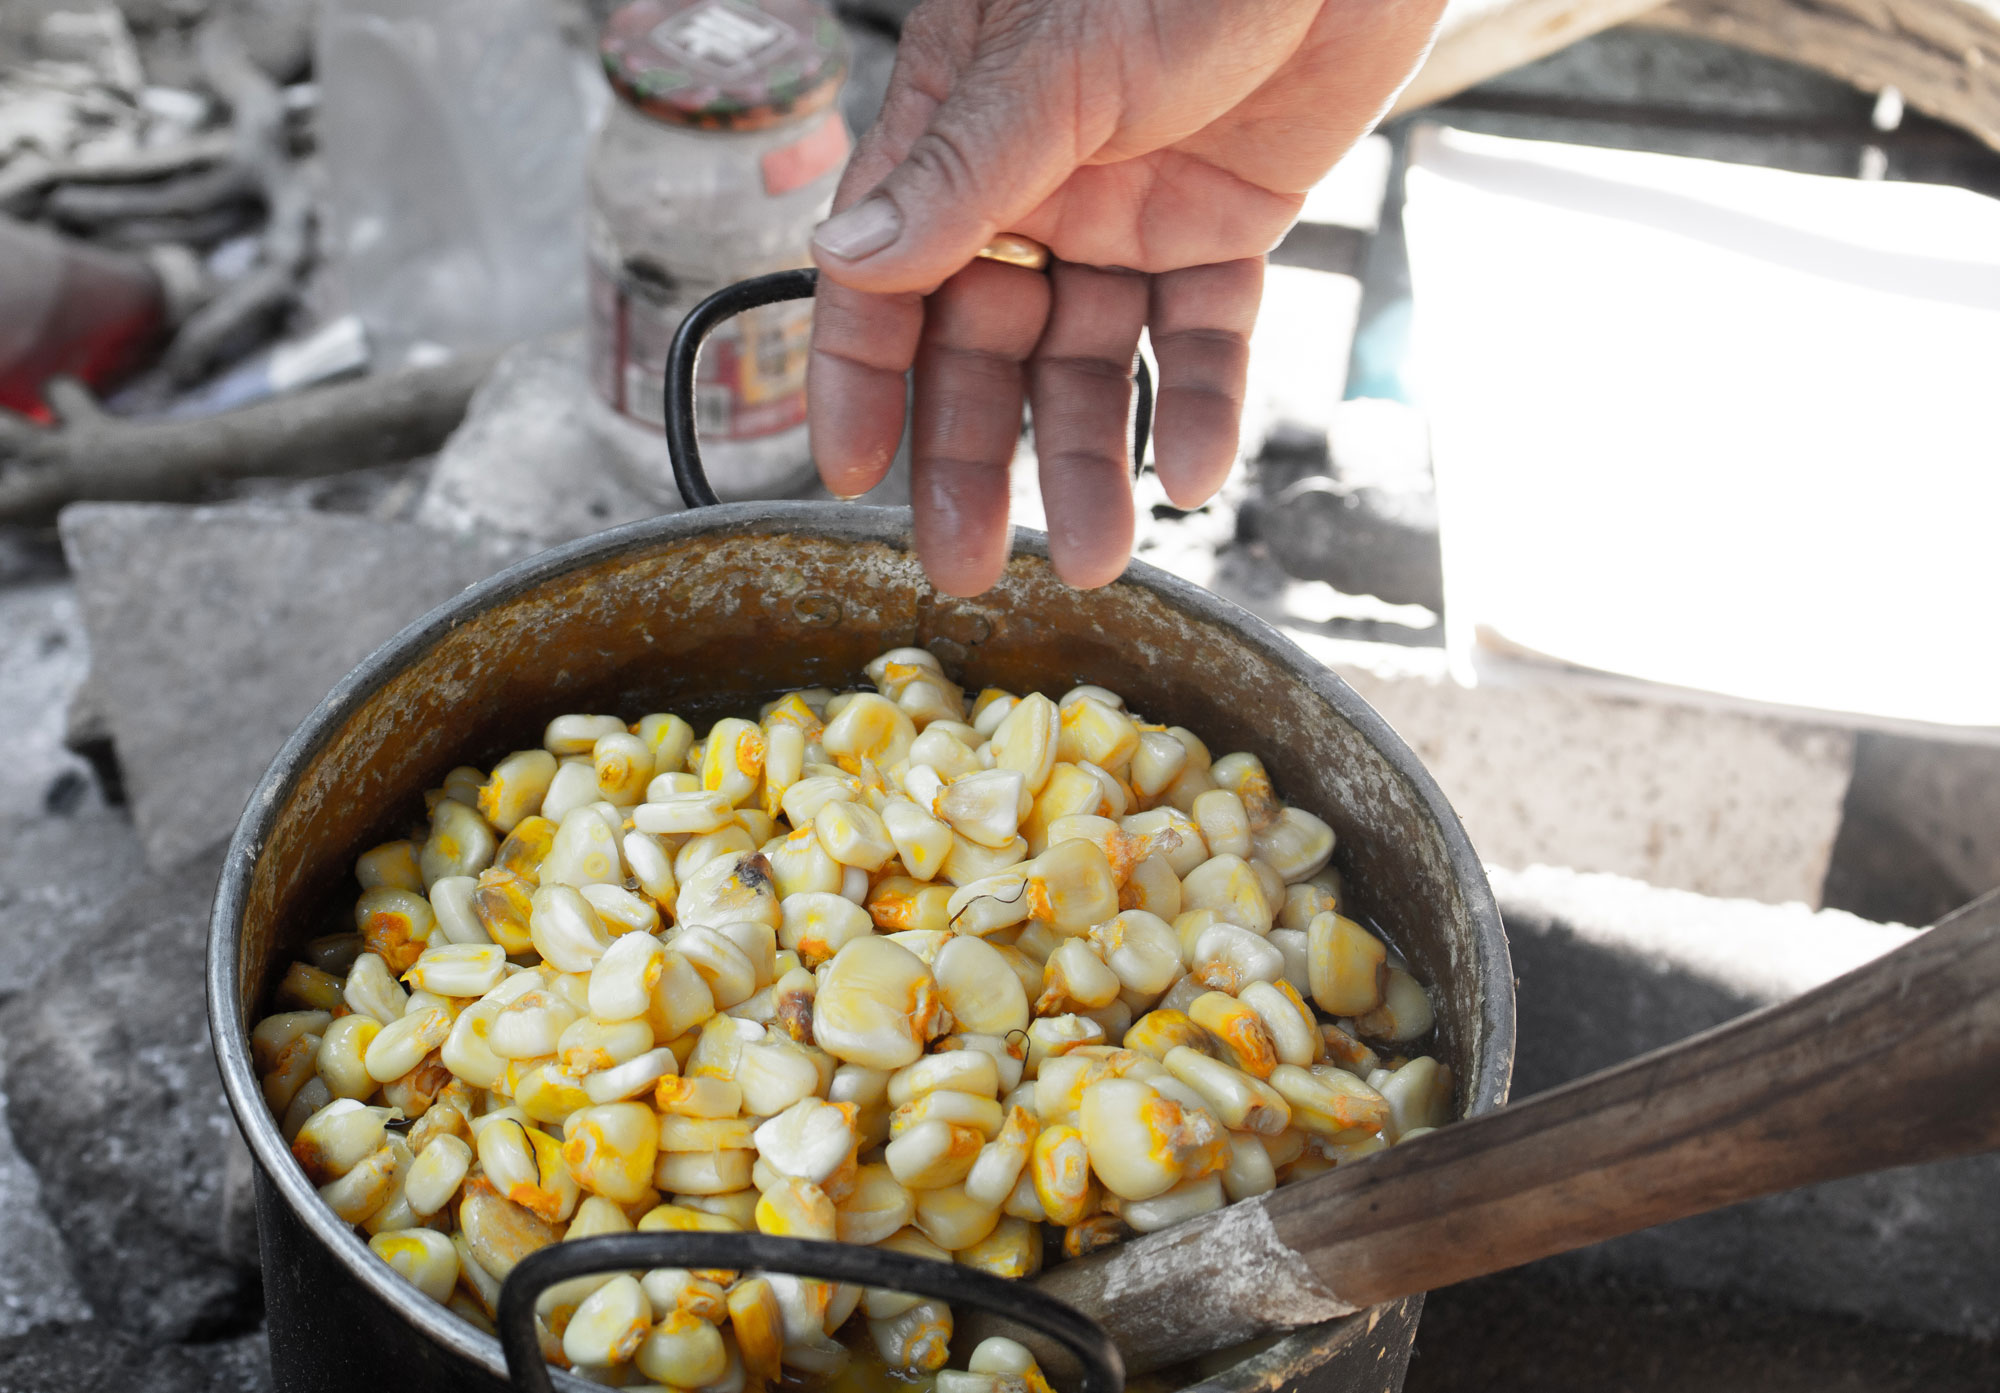 Photograph of nixtamalization of maize. The photo shows a metal pot with two handles that is filled with corn kernels. A person, mostly out of frame, is stirring the maize with a wooden spoon. The spoon has a white stain on it near the level of the pot, perhaps caused by the added lime. Cement blocks, plastic bottles, and other debris can be seen in the background.